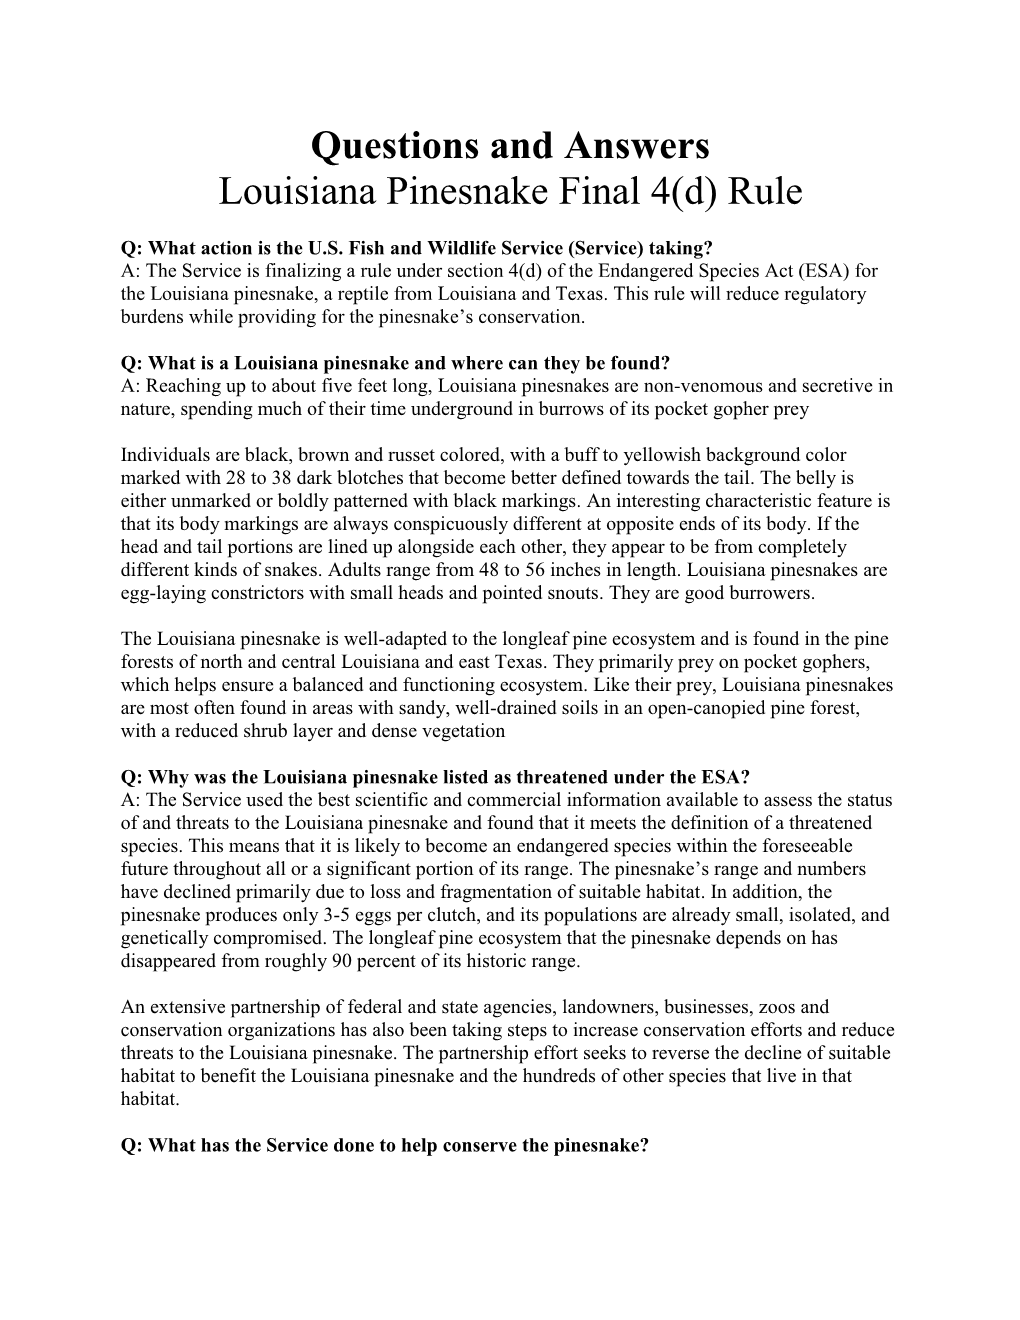 Questions and Answers Louisiana Pinesnake Final 4(D) Rule